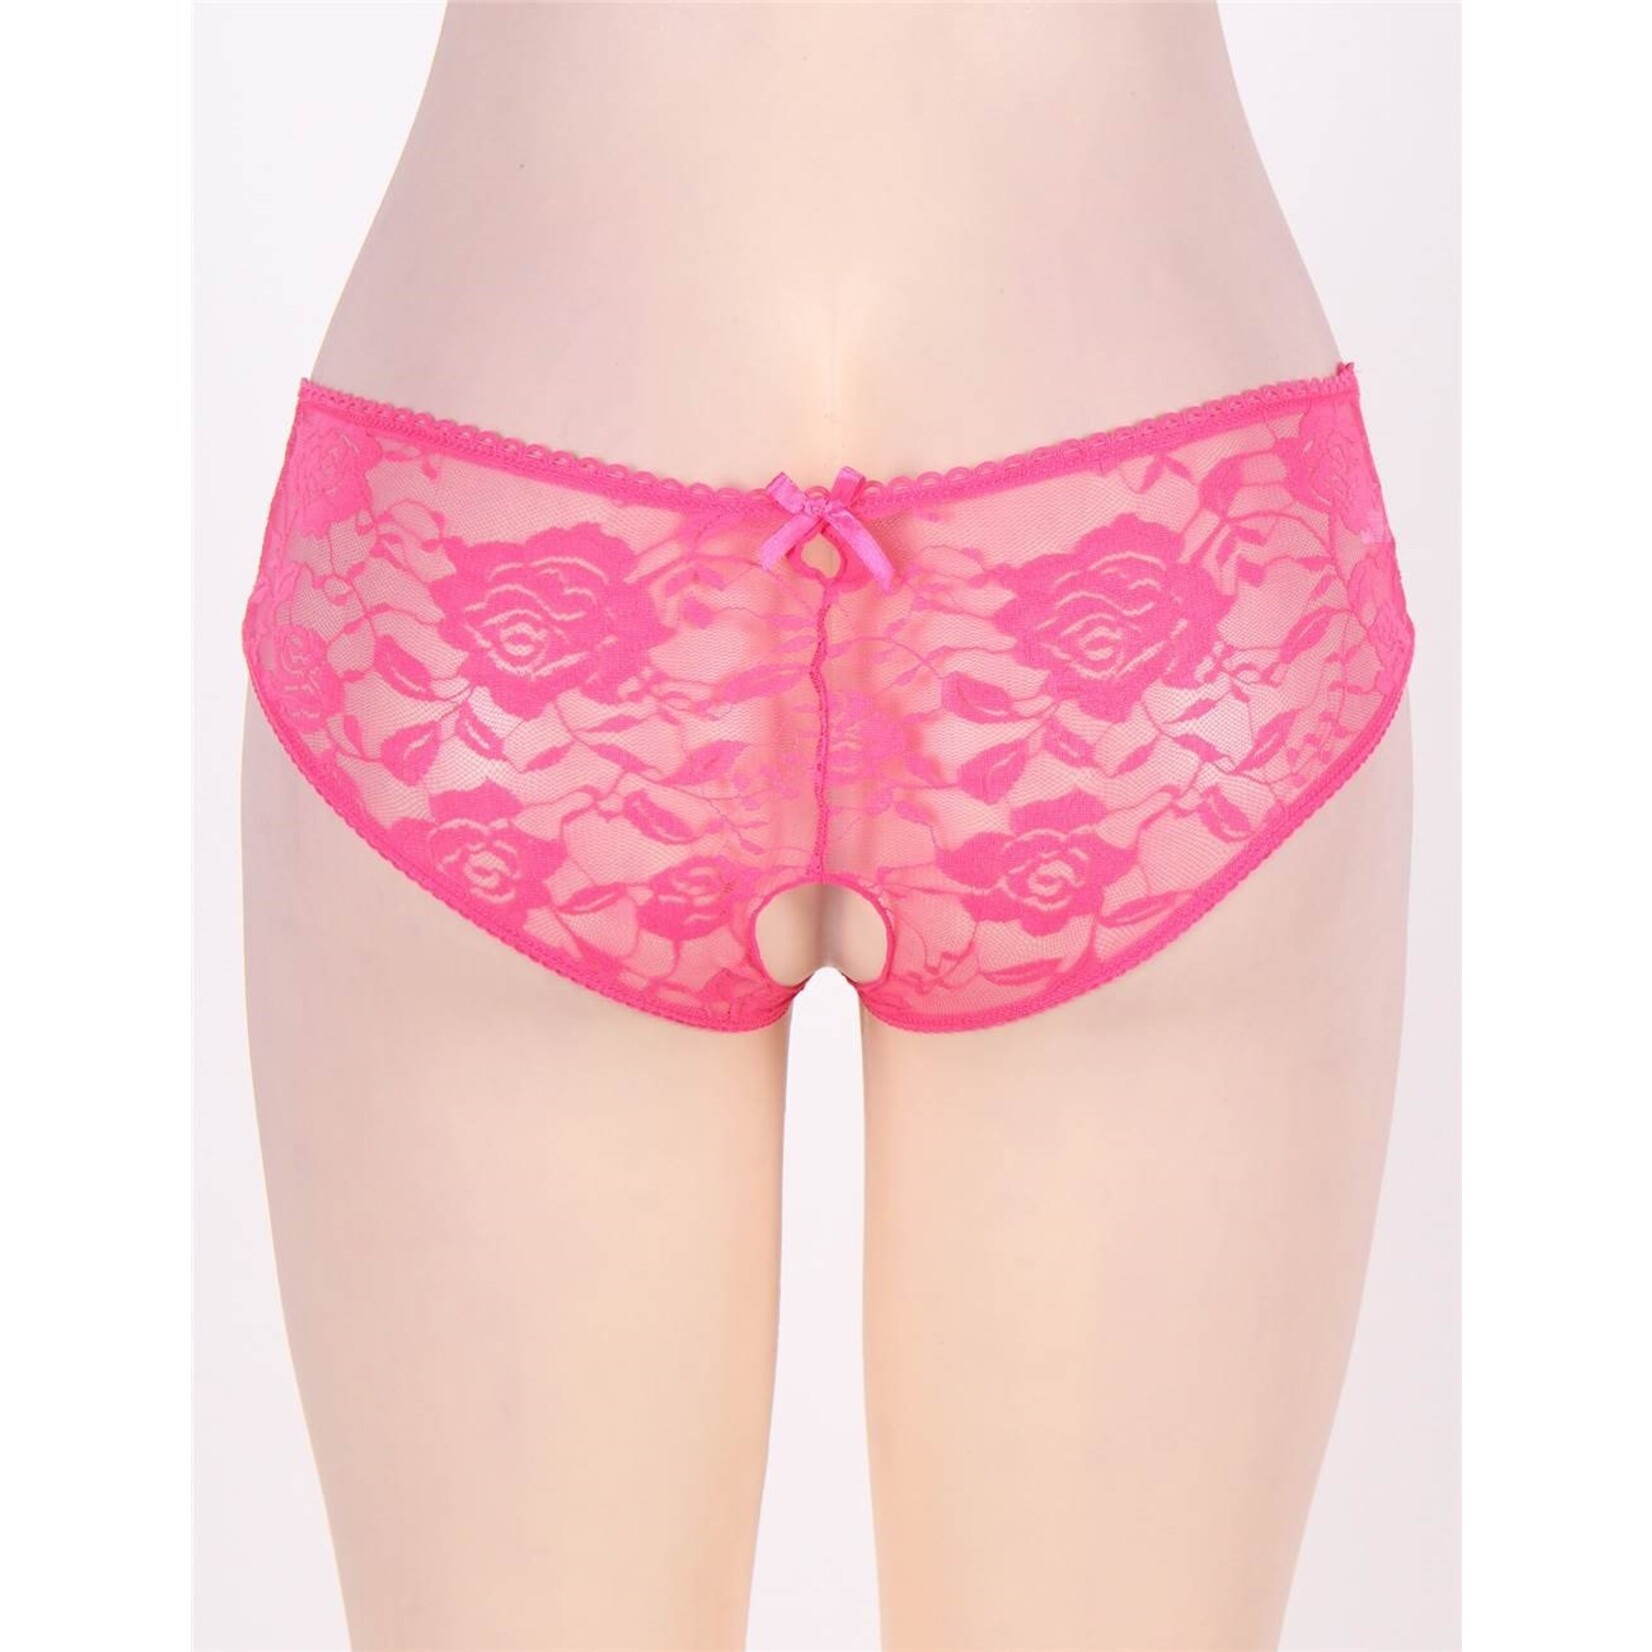 OH YEAH! -  PINK FLORAL LACE STRAPPY OPEN CROTCH PANTY XS-S